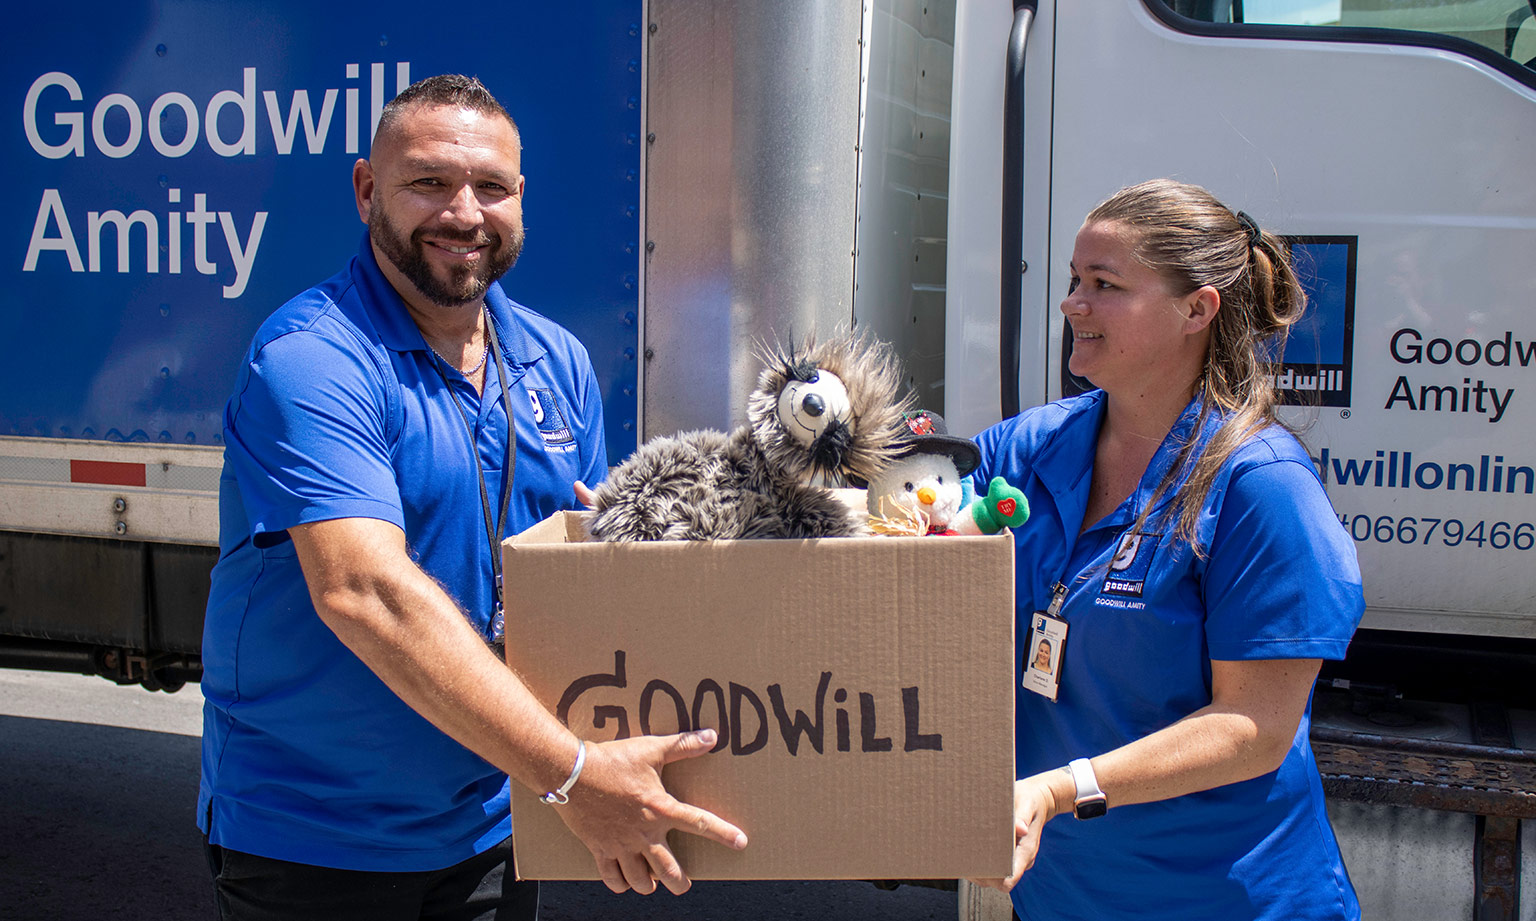 Two Goodwill employees holding a donation box in front of the donation truck